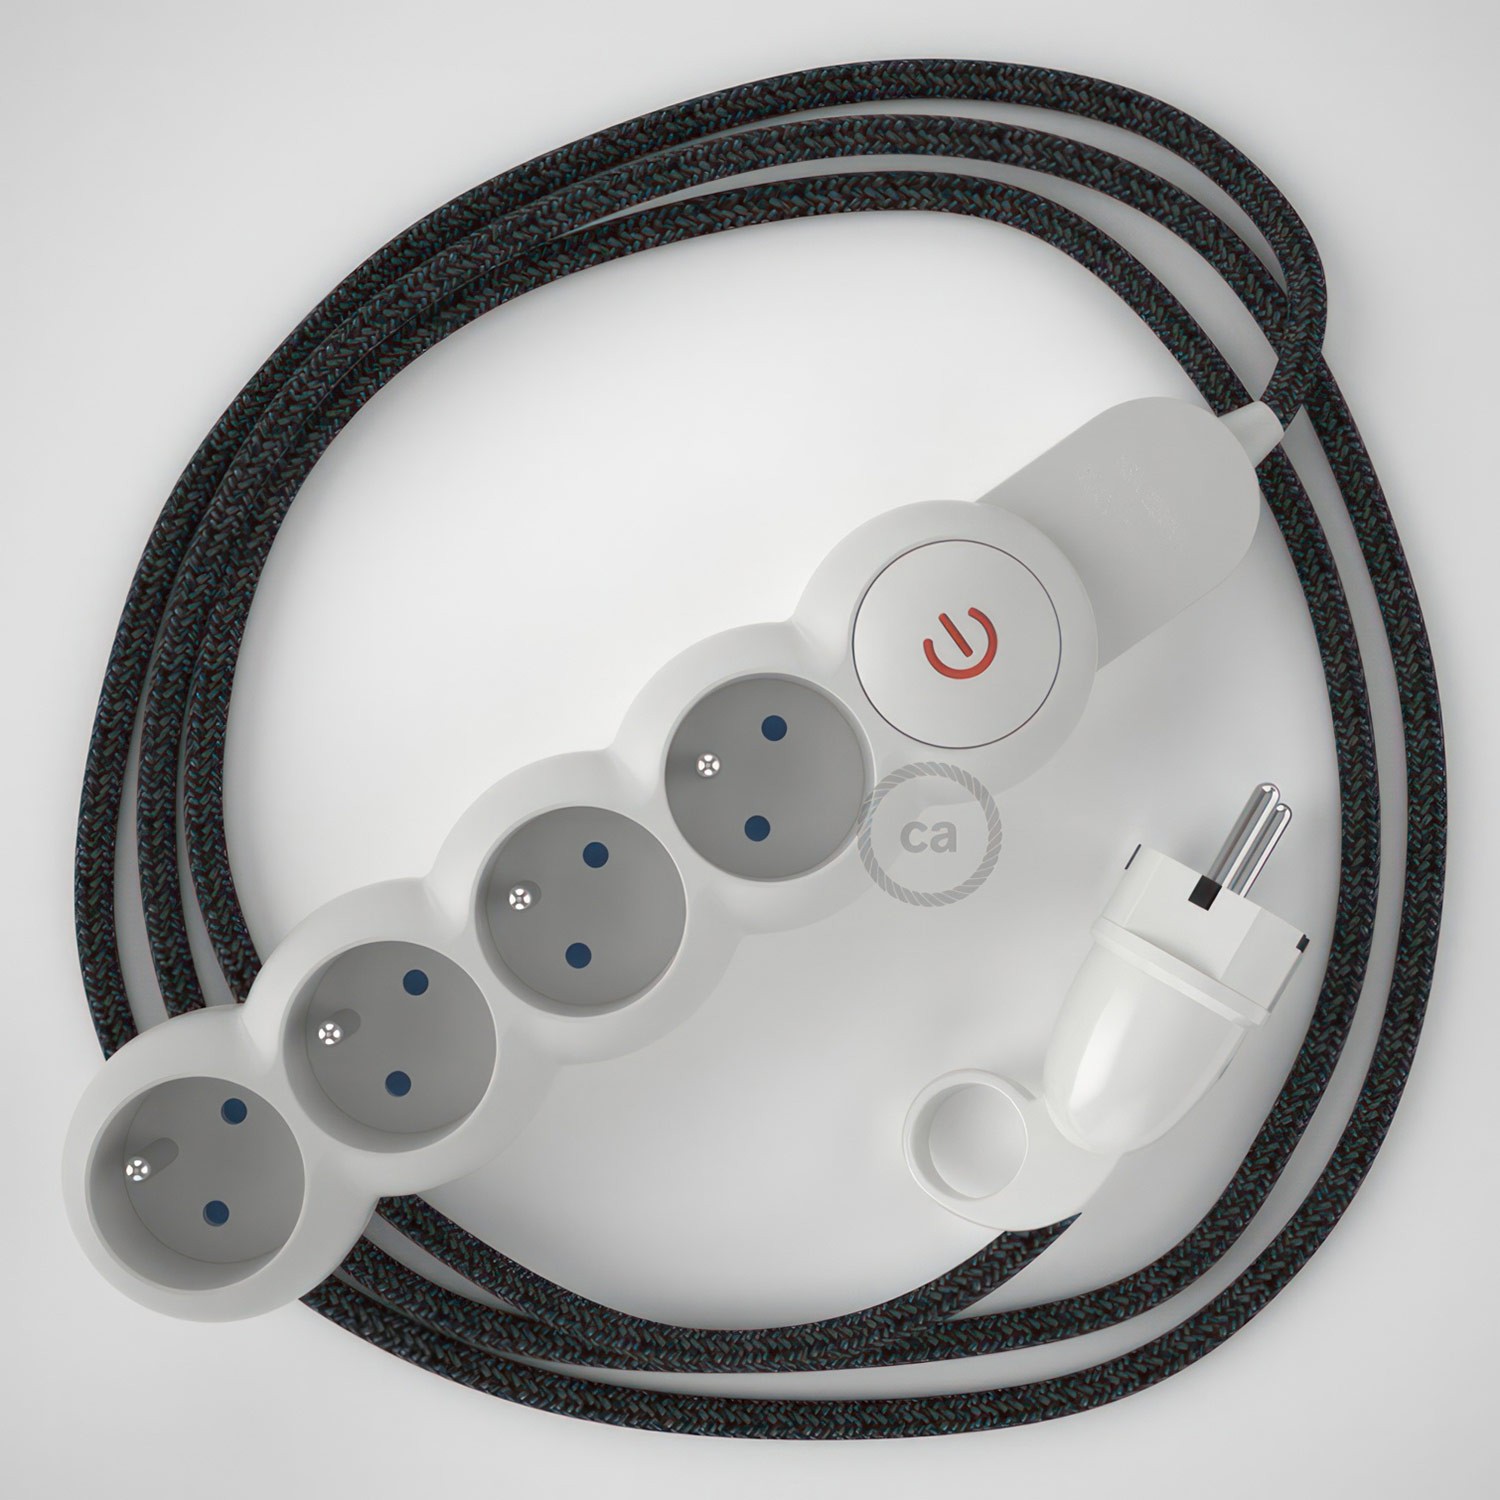 French Power Strip with electrical cable covered in Anthracite Natural Linen fabric RN03 and Schuko plug with confort ring